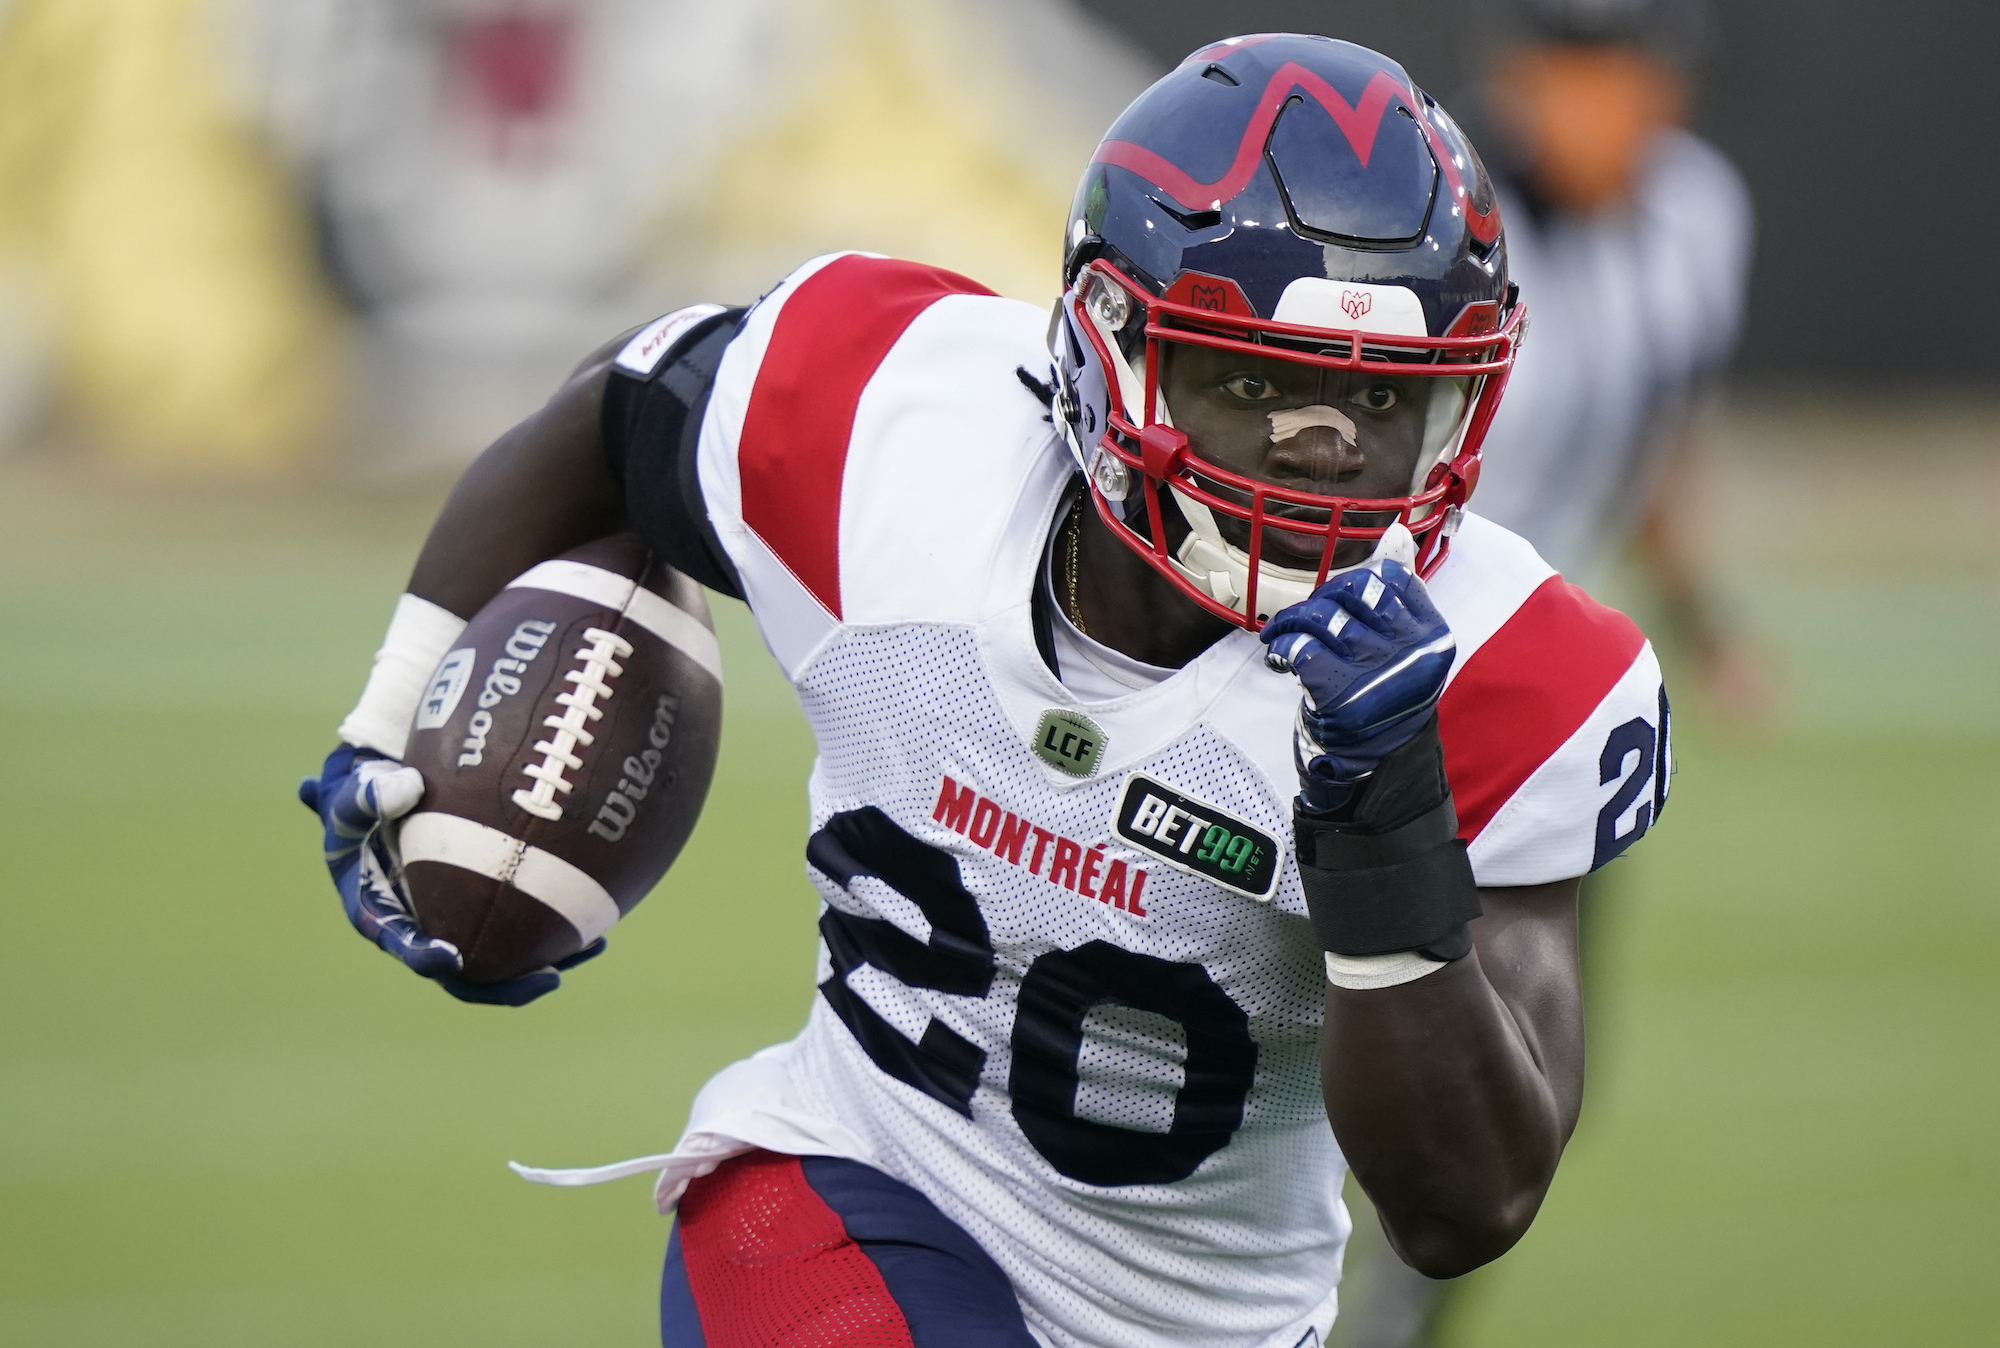 HAMILTON, ON - OCTOBER 02: Jeshrun Antwi #20 of the Montreal Alouettes gains yards after a pass reception against the Hamilton Tiger-Cats at Tim Hortons Field on October 2, 2021 in Hamilton, Canada. (Photo by John E. Sokolowski/Getty Images)